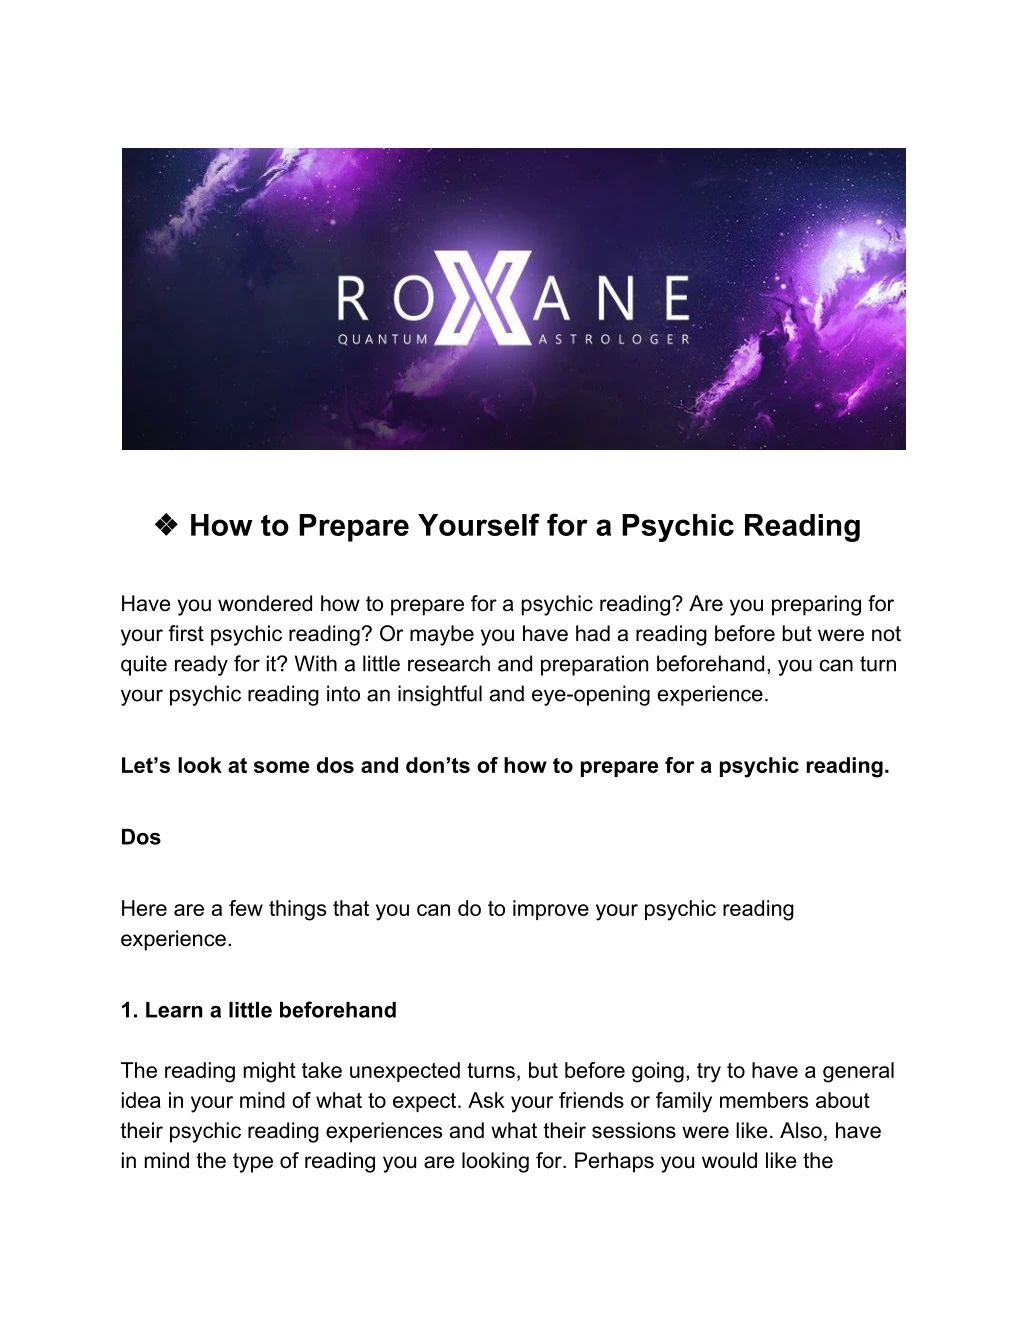 how to prepare yourself for a psychic reading